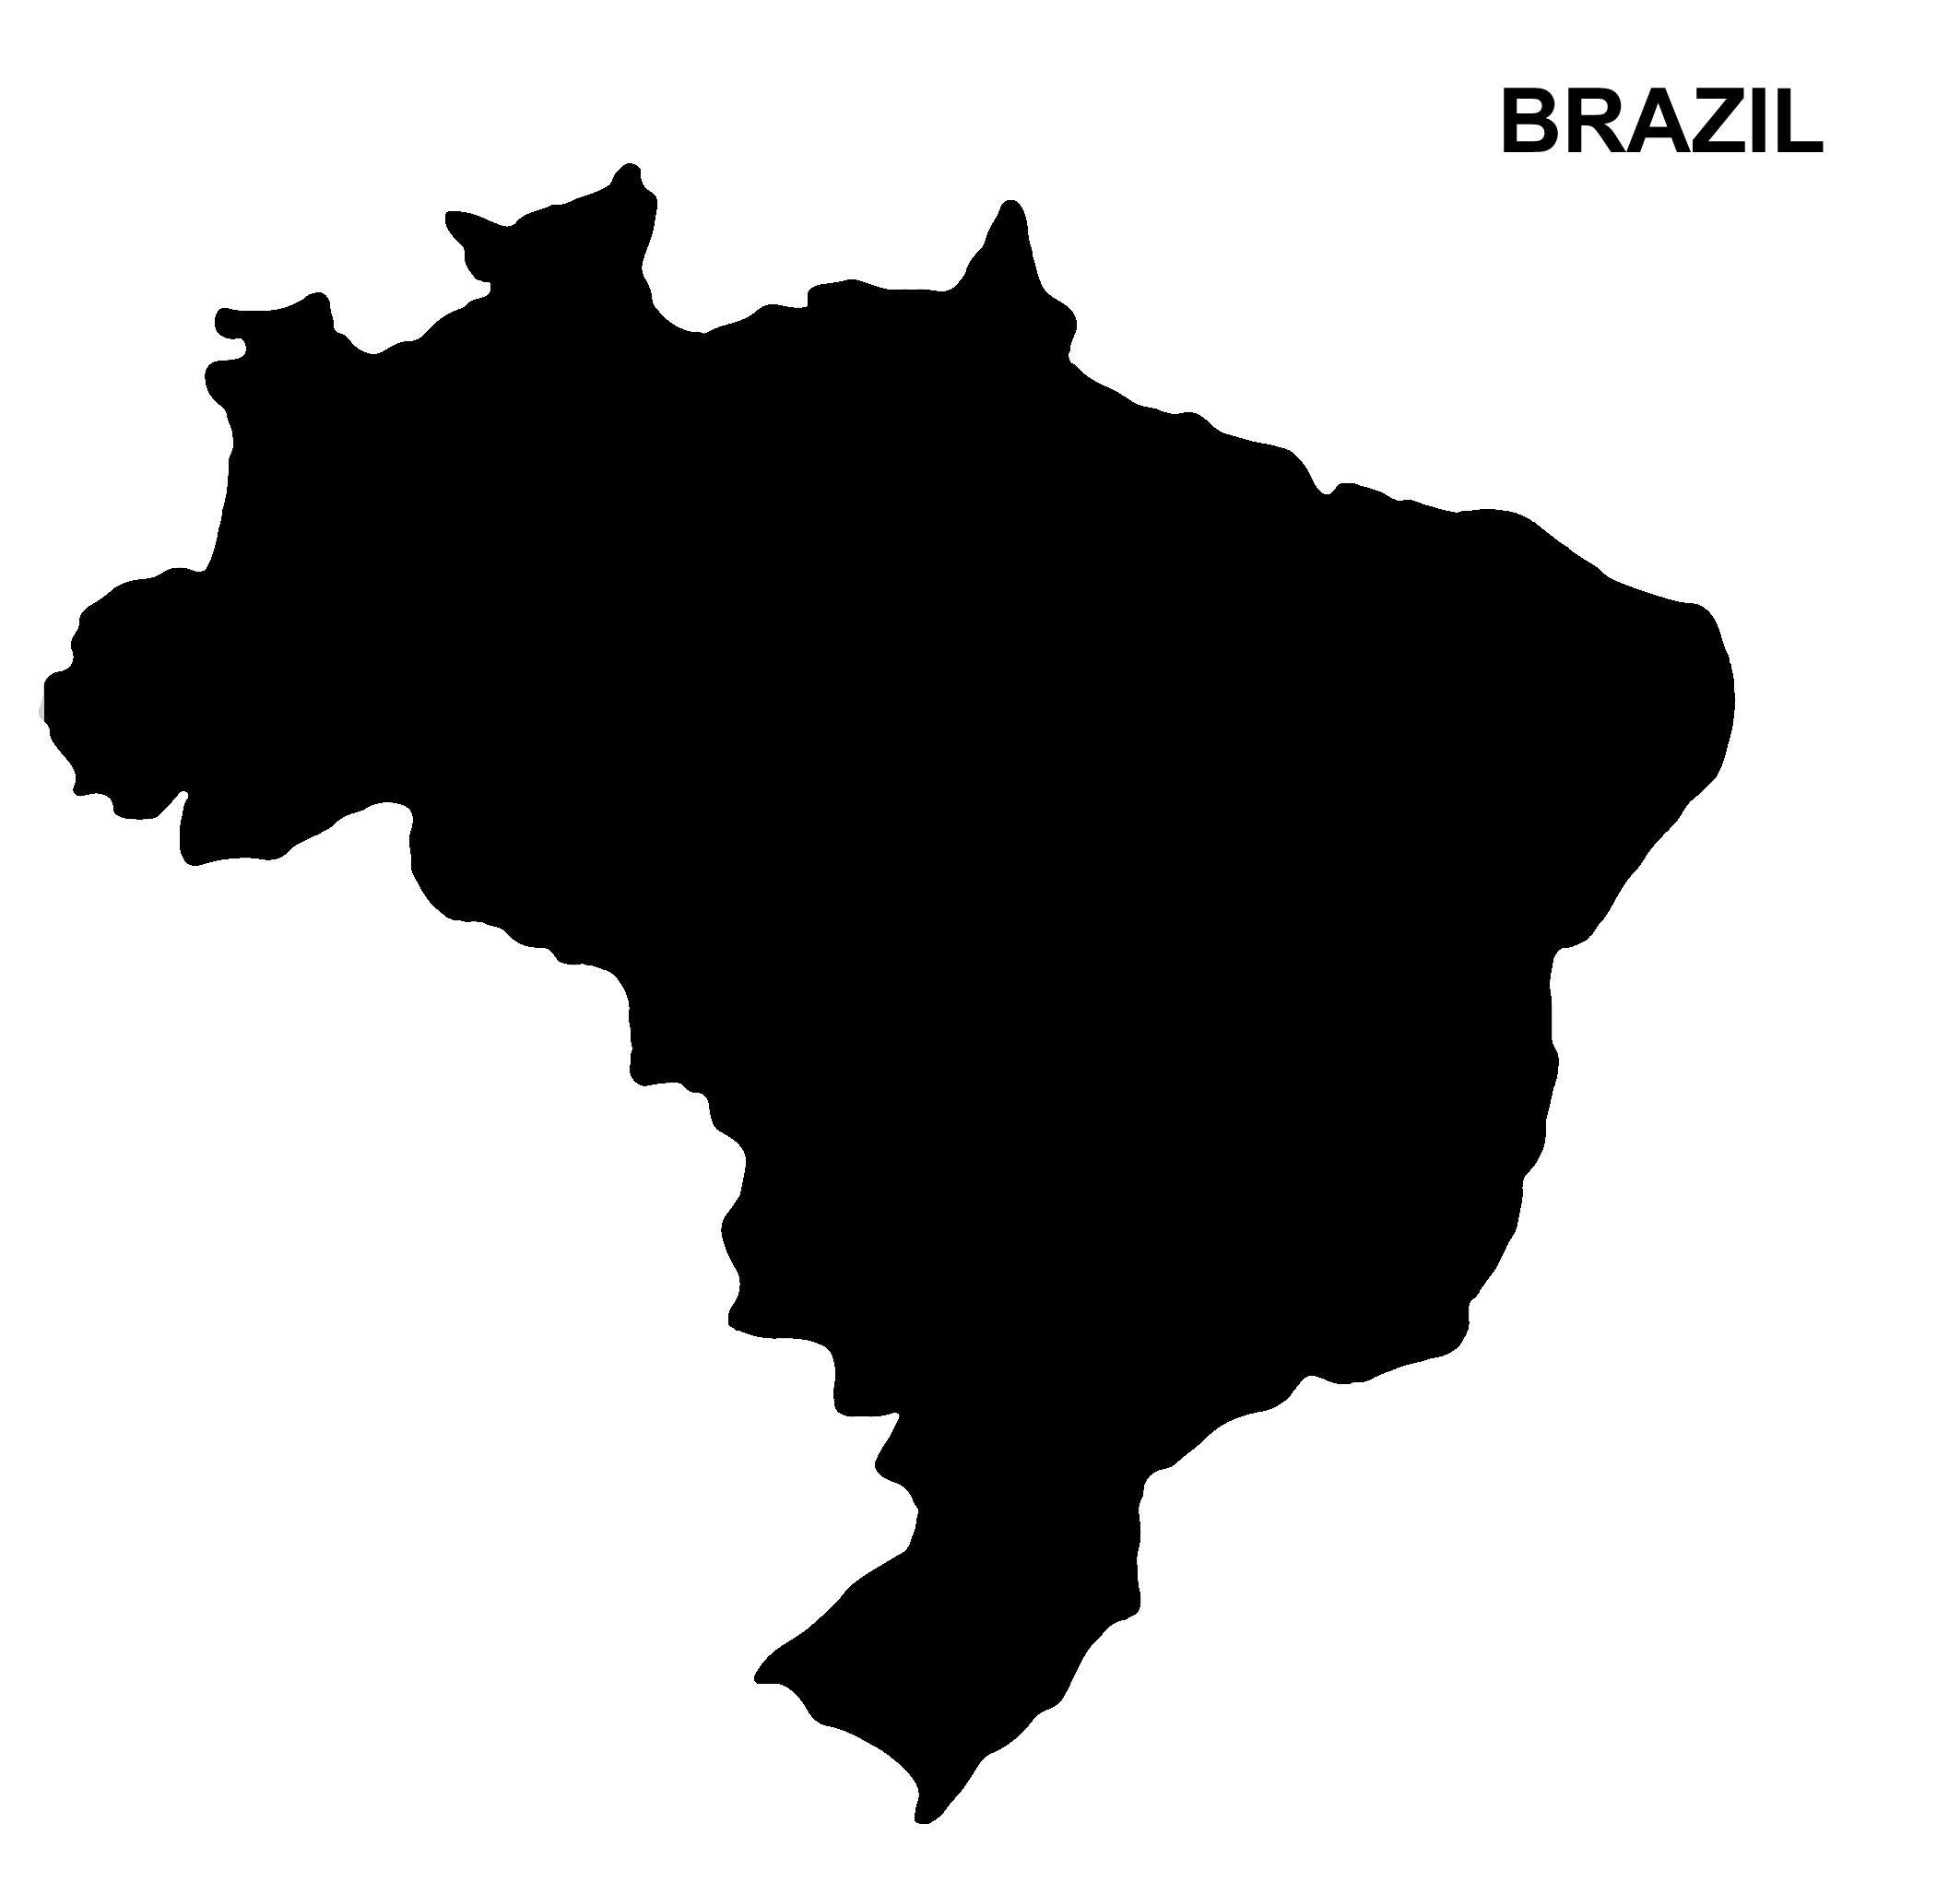 Map of Brazil silhouette